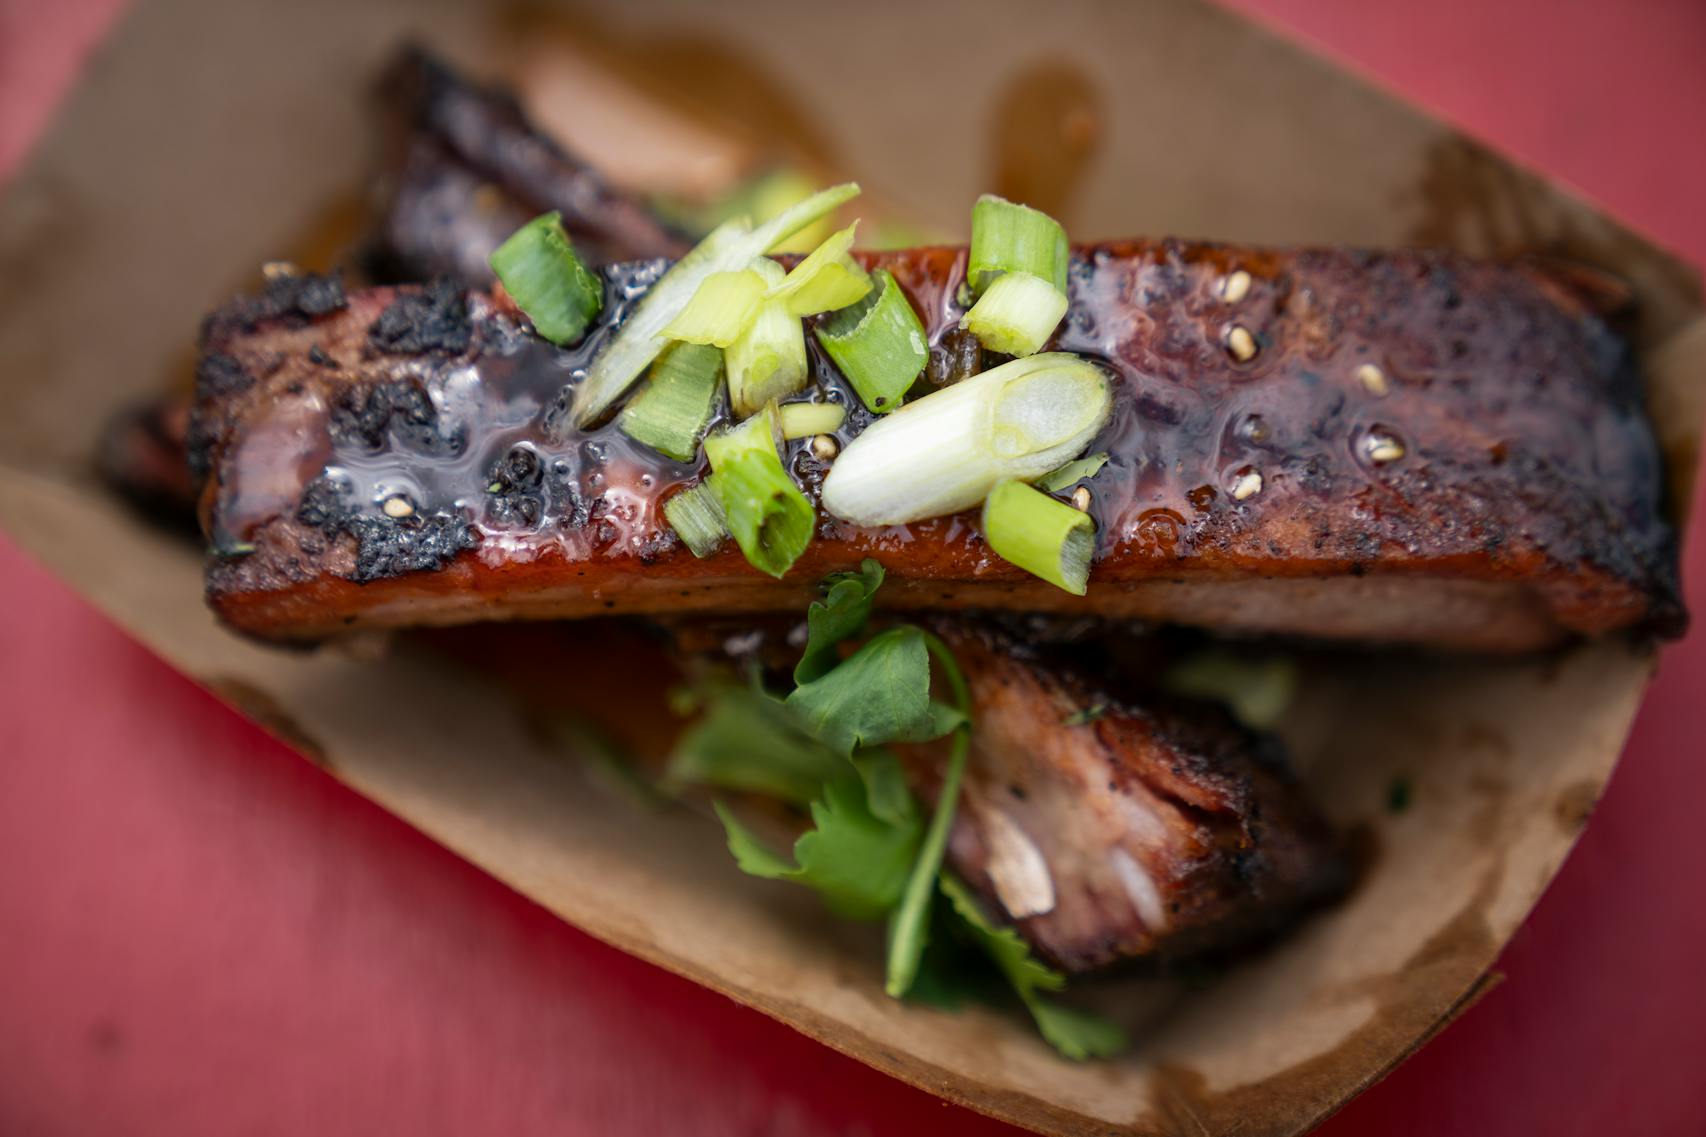 Maui-Sota Sticky Ribs from RC’s BBQ. The new foods of the 2023 Minnesota State Fair photographed on the first day of the fair in Falcon Heights, Minn. on Tuesday, Aug. 8, 2023. ] LEILA NAVIDI • leila.navidi@startribune.com